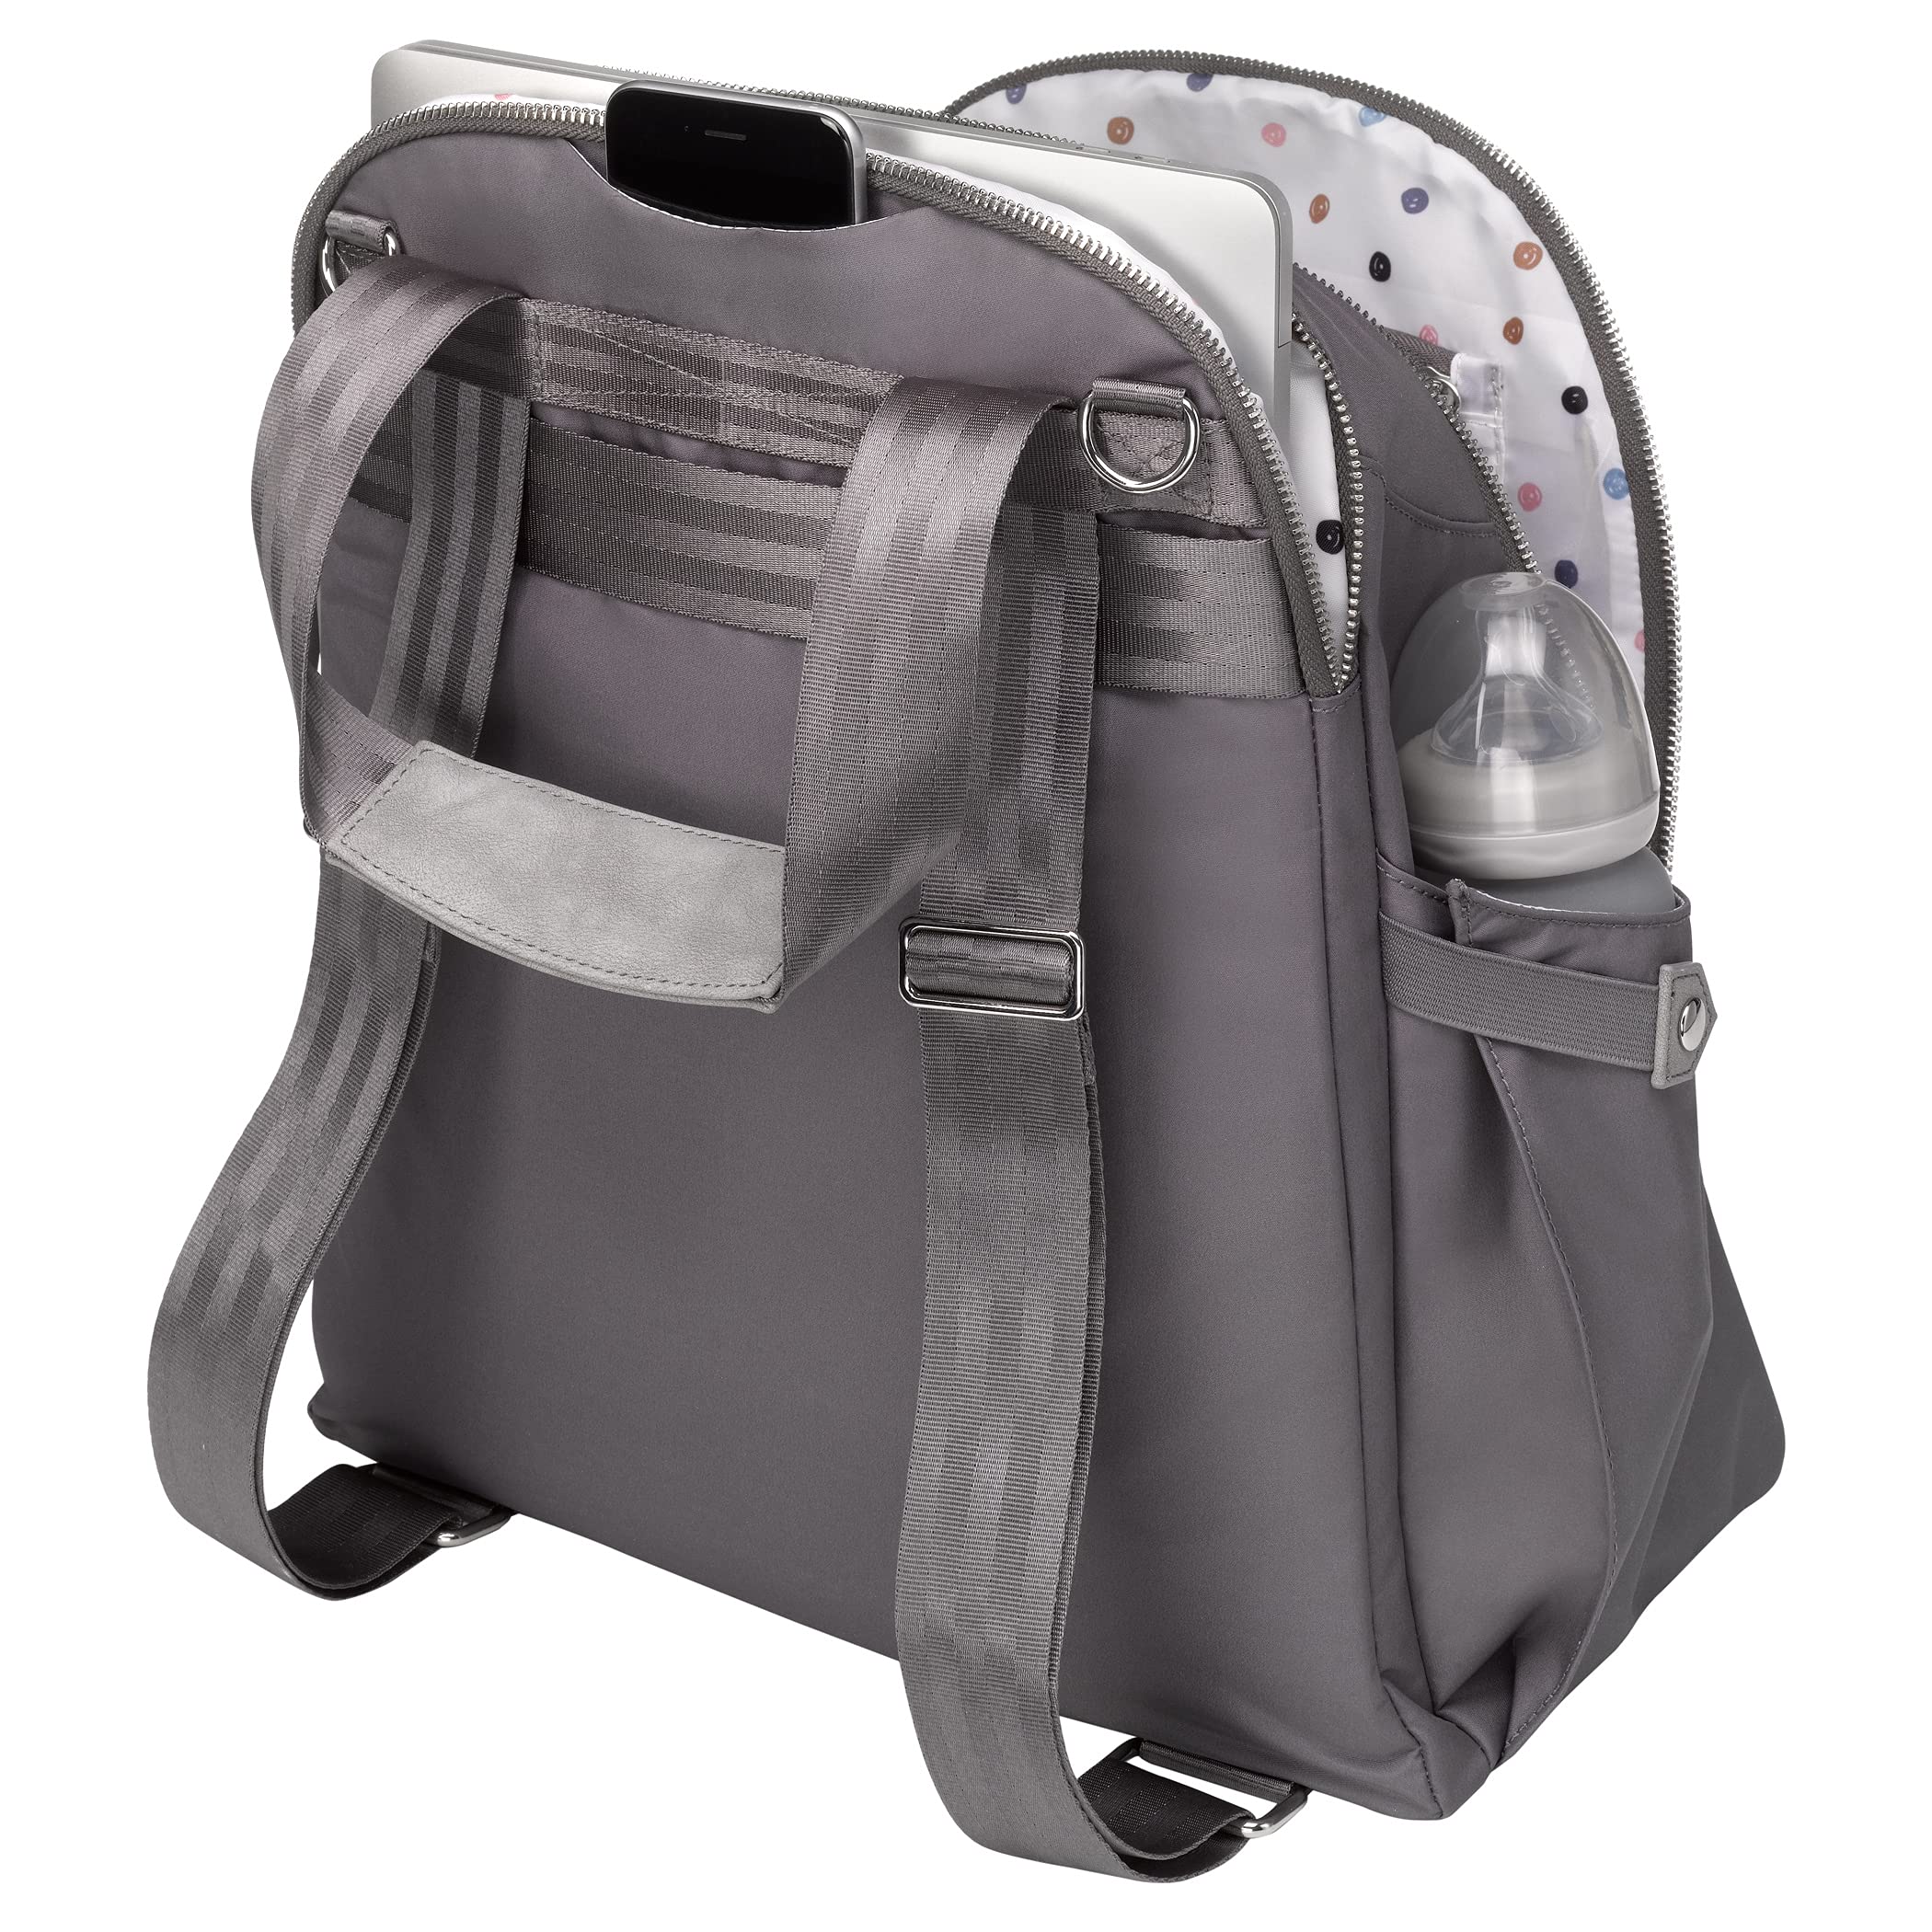 Petunia Pickle Bottom Inter-Mix Slope Backpack - Machine-Washable Diaper Bag - Ultimate His & Hers Backpack - Spacious & Versatile Bag - Compatible with Inter-Mix Systems - Charcoal Microfiber